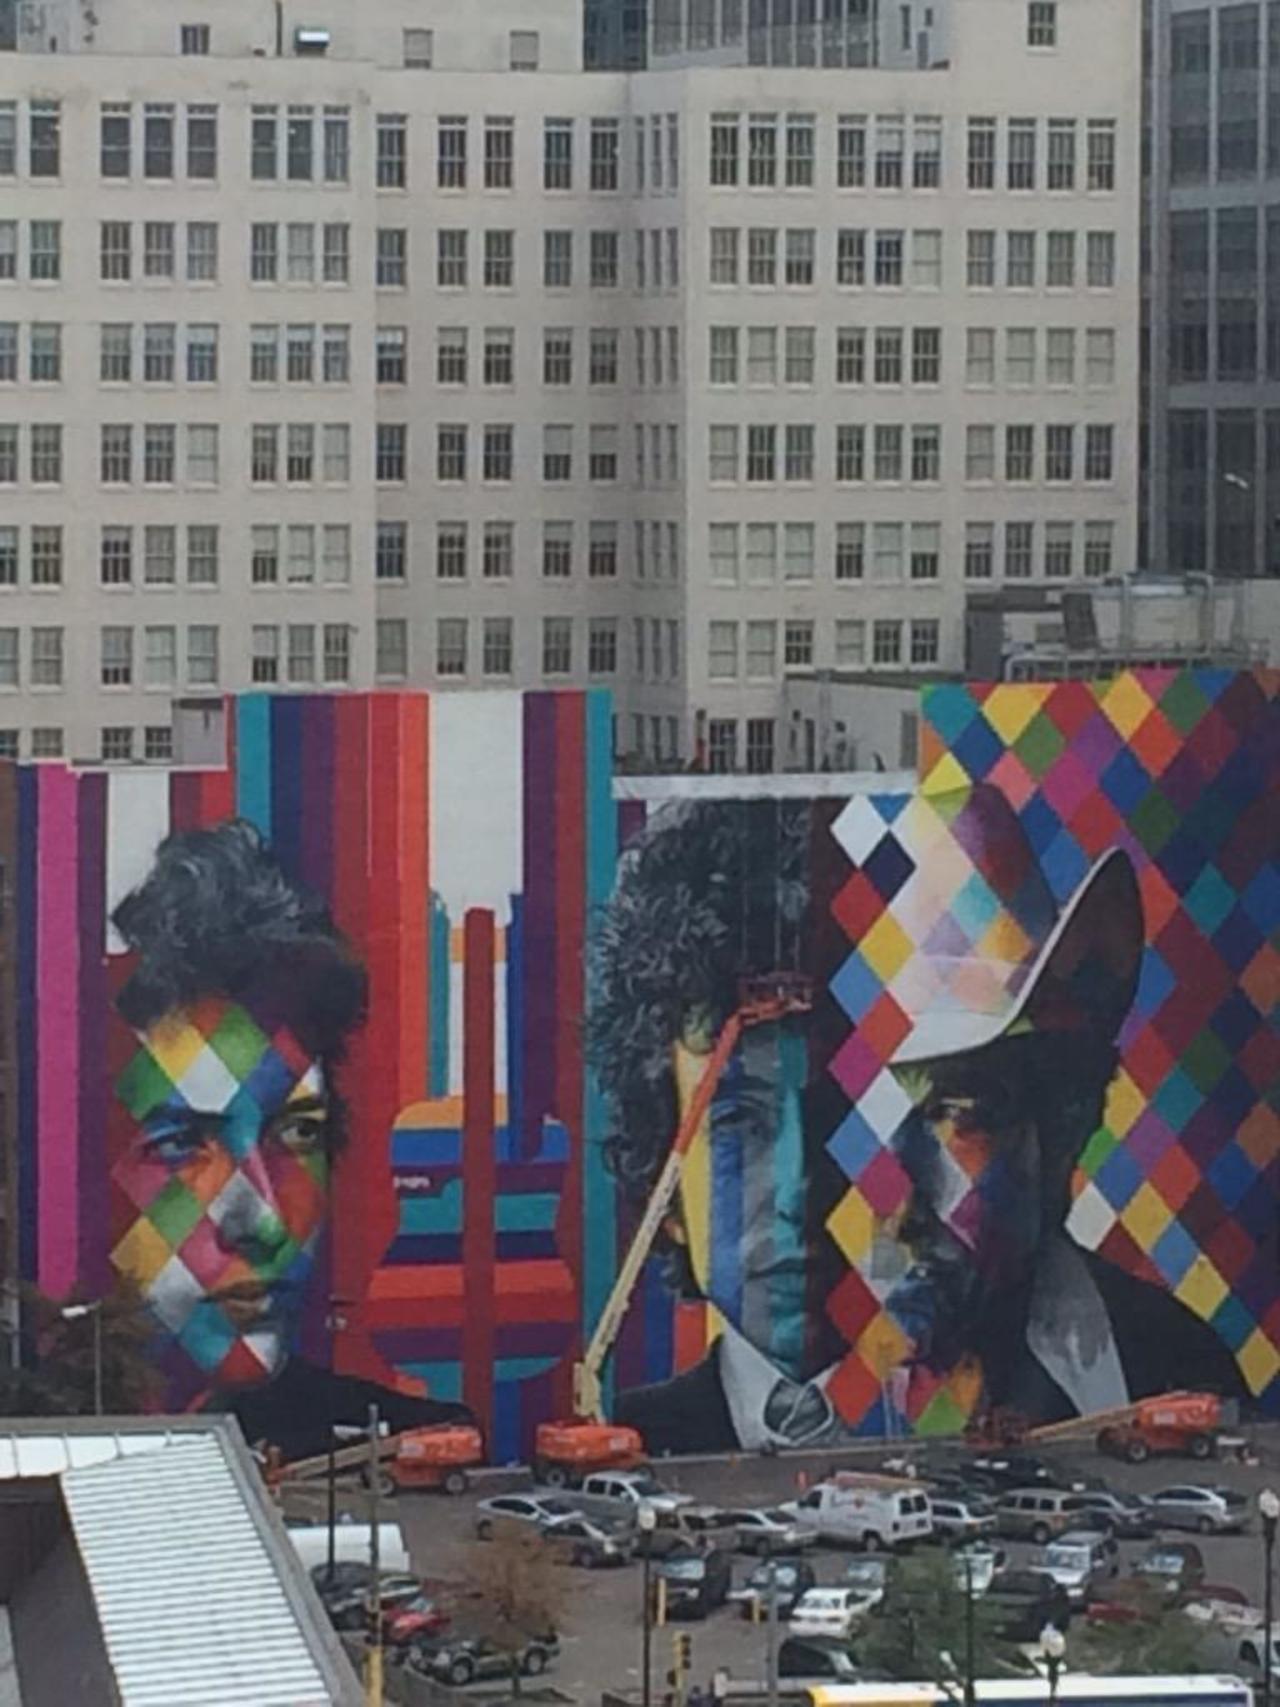 My view of artist Eduardo Kobra's mural of Bob Dylan from @SpongPR. Almost complete. Time lapse yet to come. #kobra http://t.co/lIzn3RCy3C